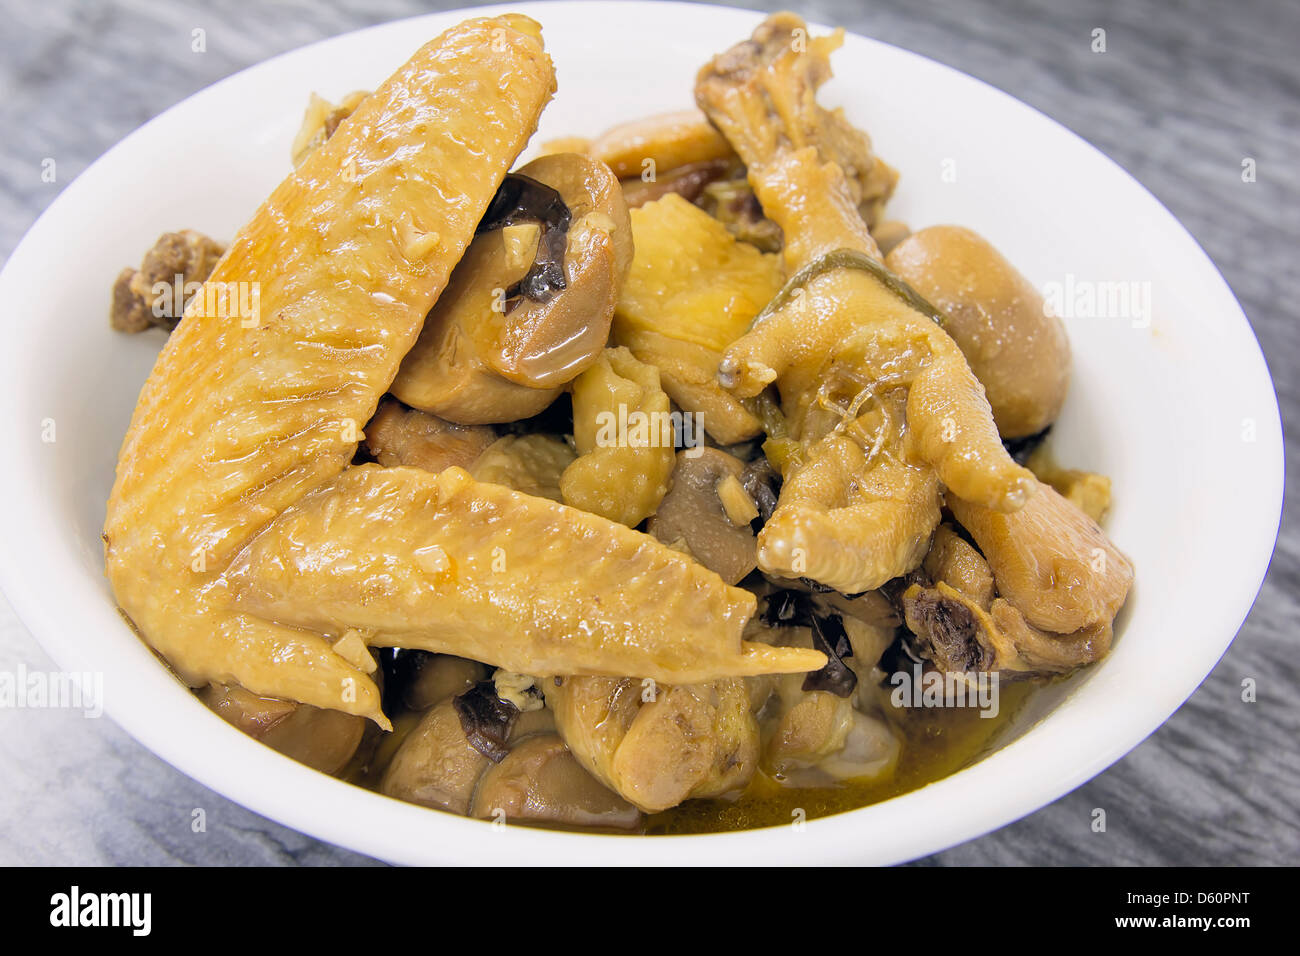 Chinese Soy Sauce Chicken Wings Feet with Garlic Button Mushrooms and Black Fungus Dish Stock Photo